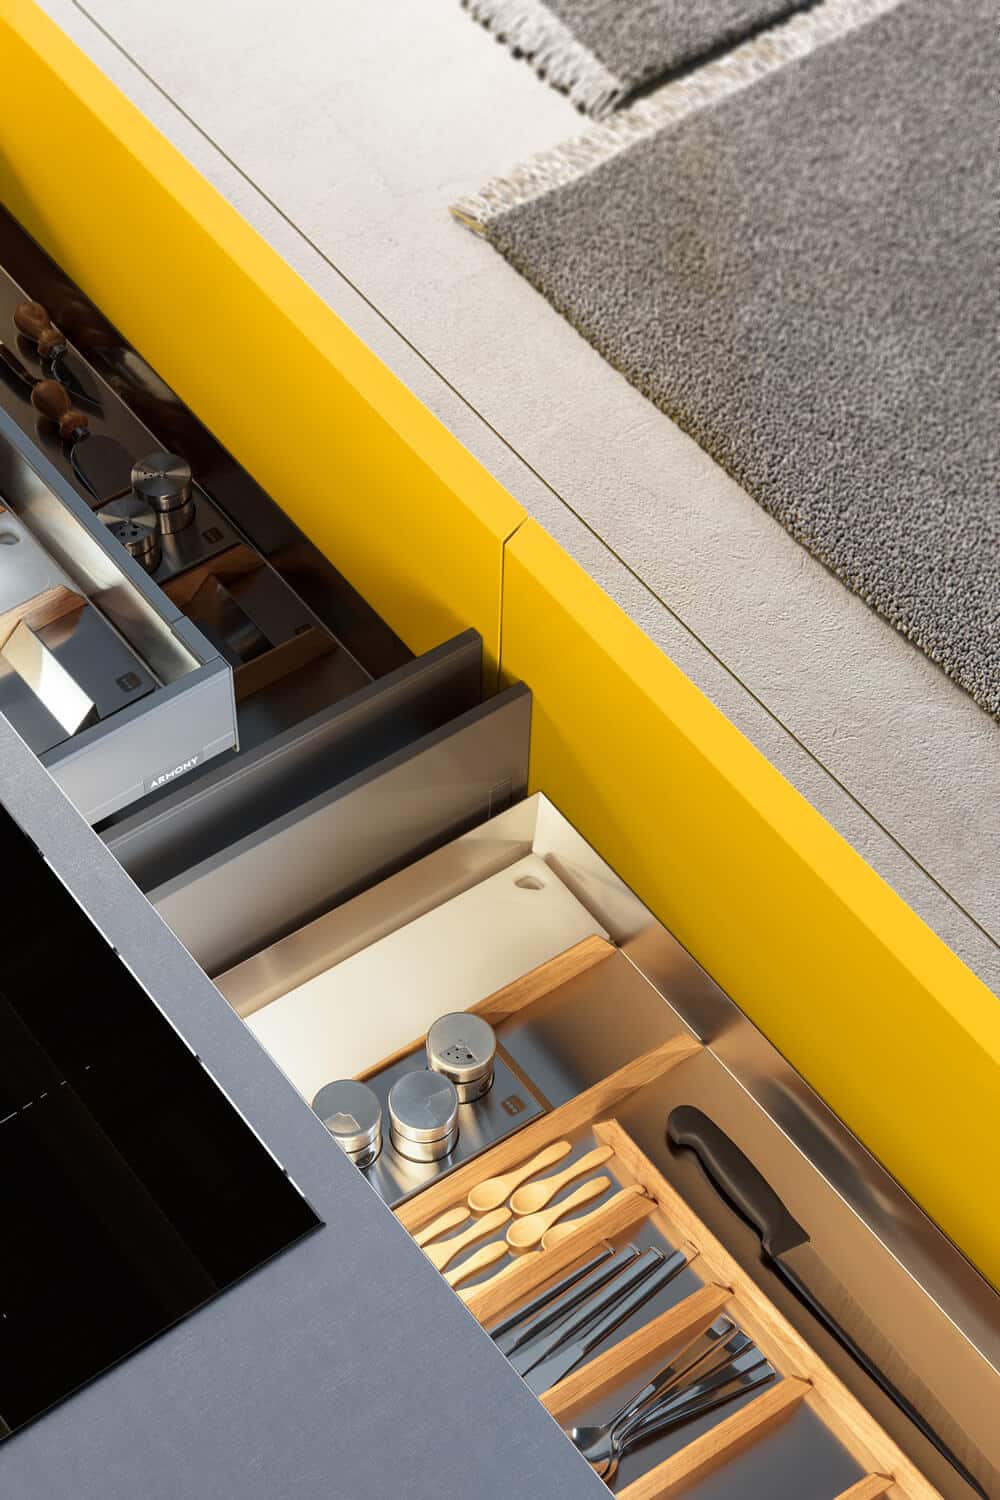 The Elite Line drawer accessories in Oak wood and stainless steel bring modern elegance to the interior of the kitchen.